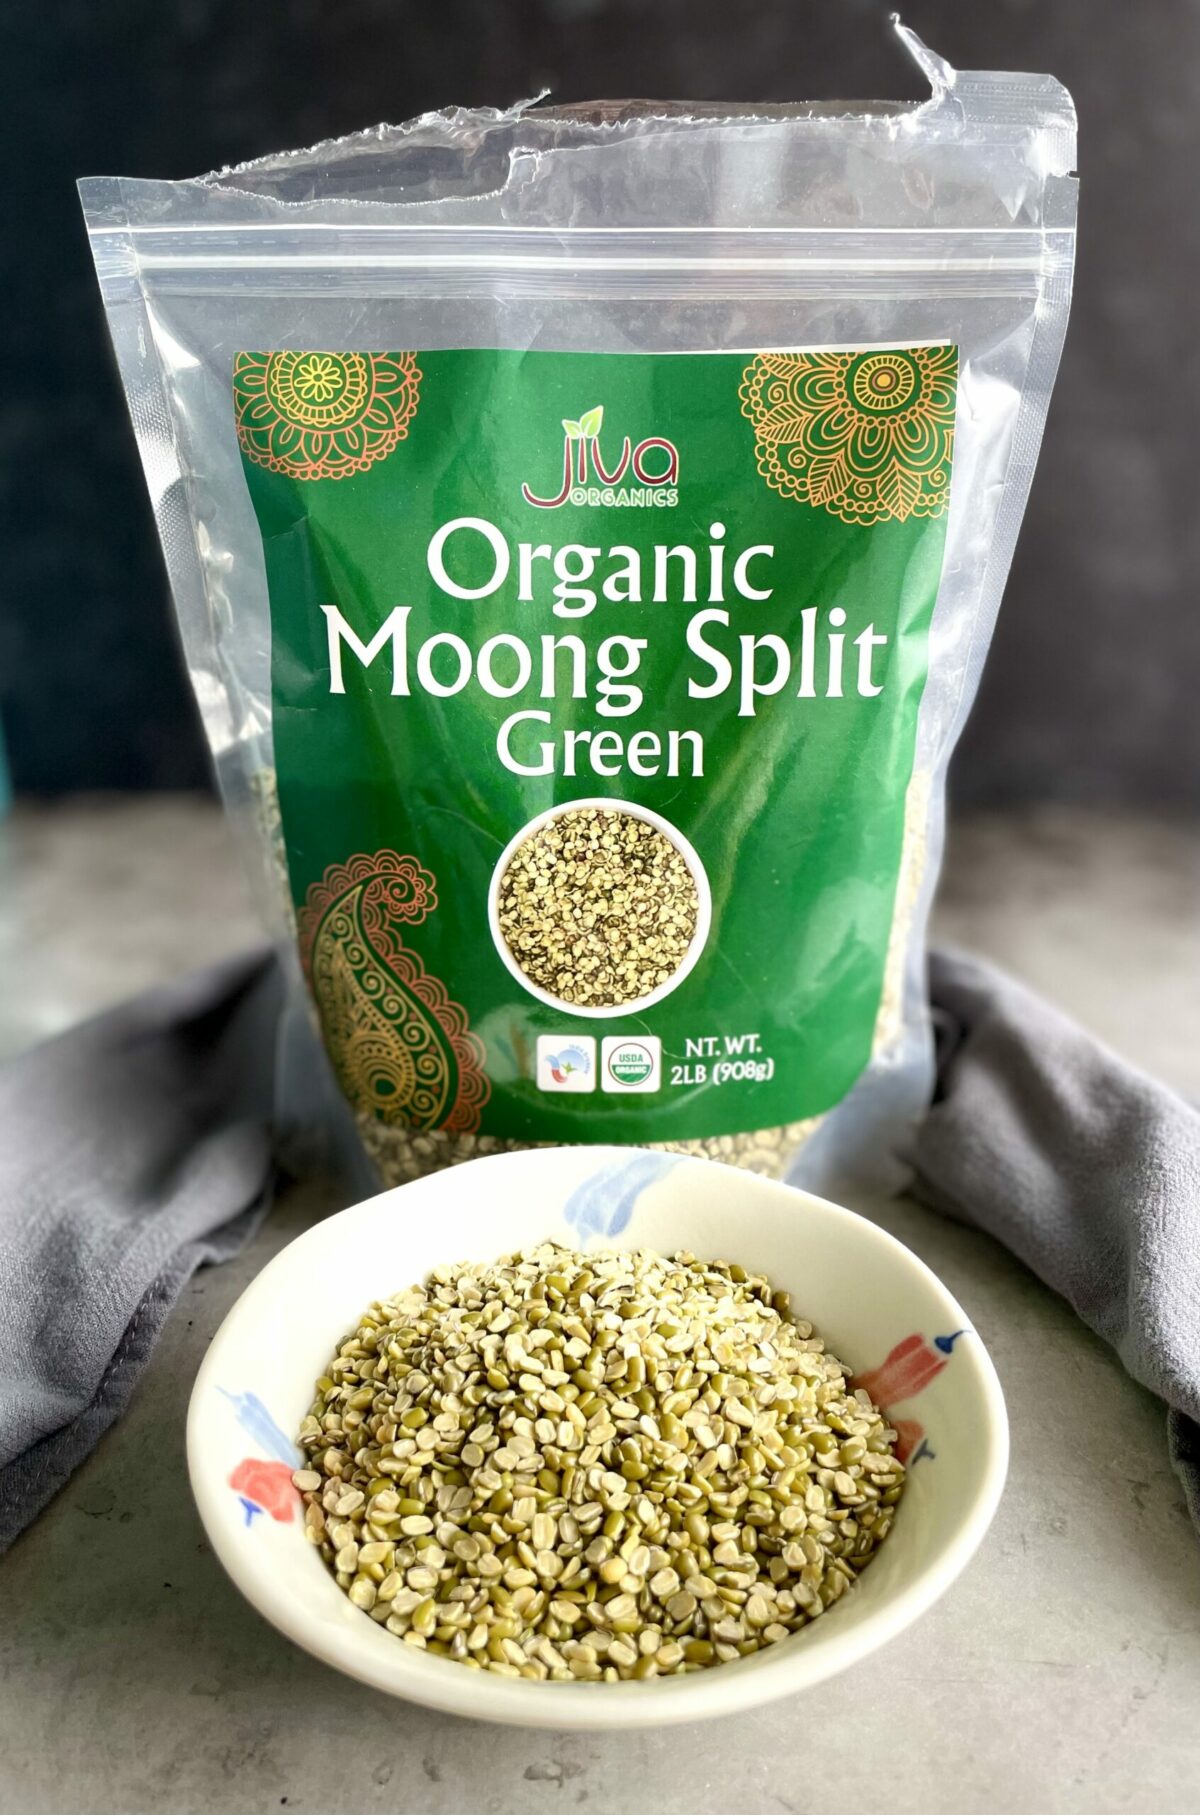 Jiva organic split moong dal (split green mung beans) in packaging and displayed in a small bowl.